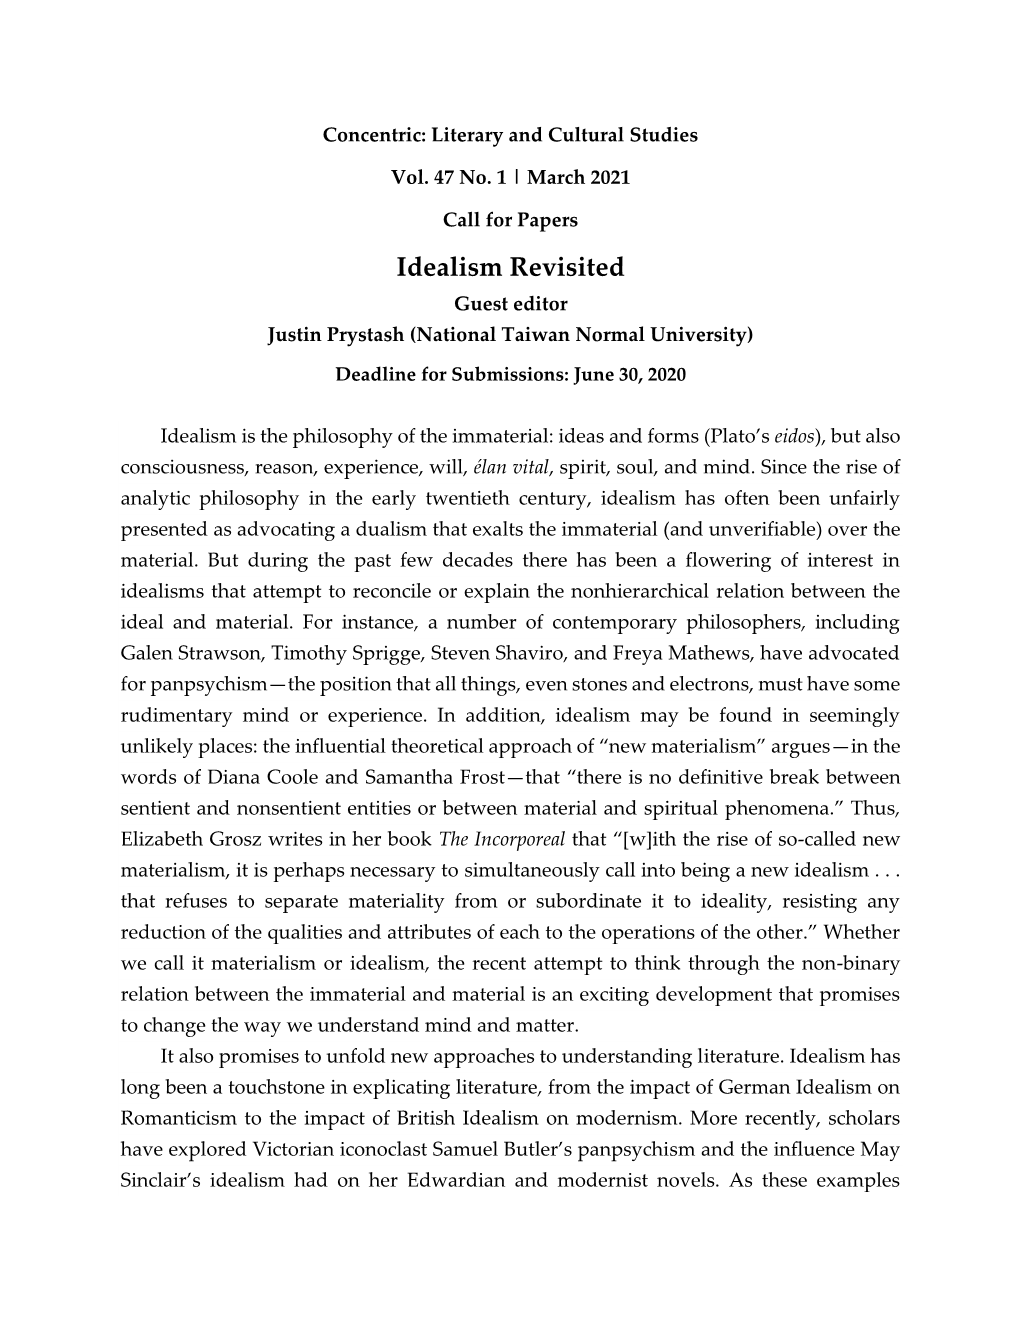 Idealism Revisited Guest Editor Justin Prystash (National Taiwan Normal University)